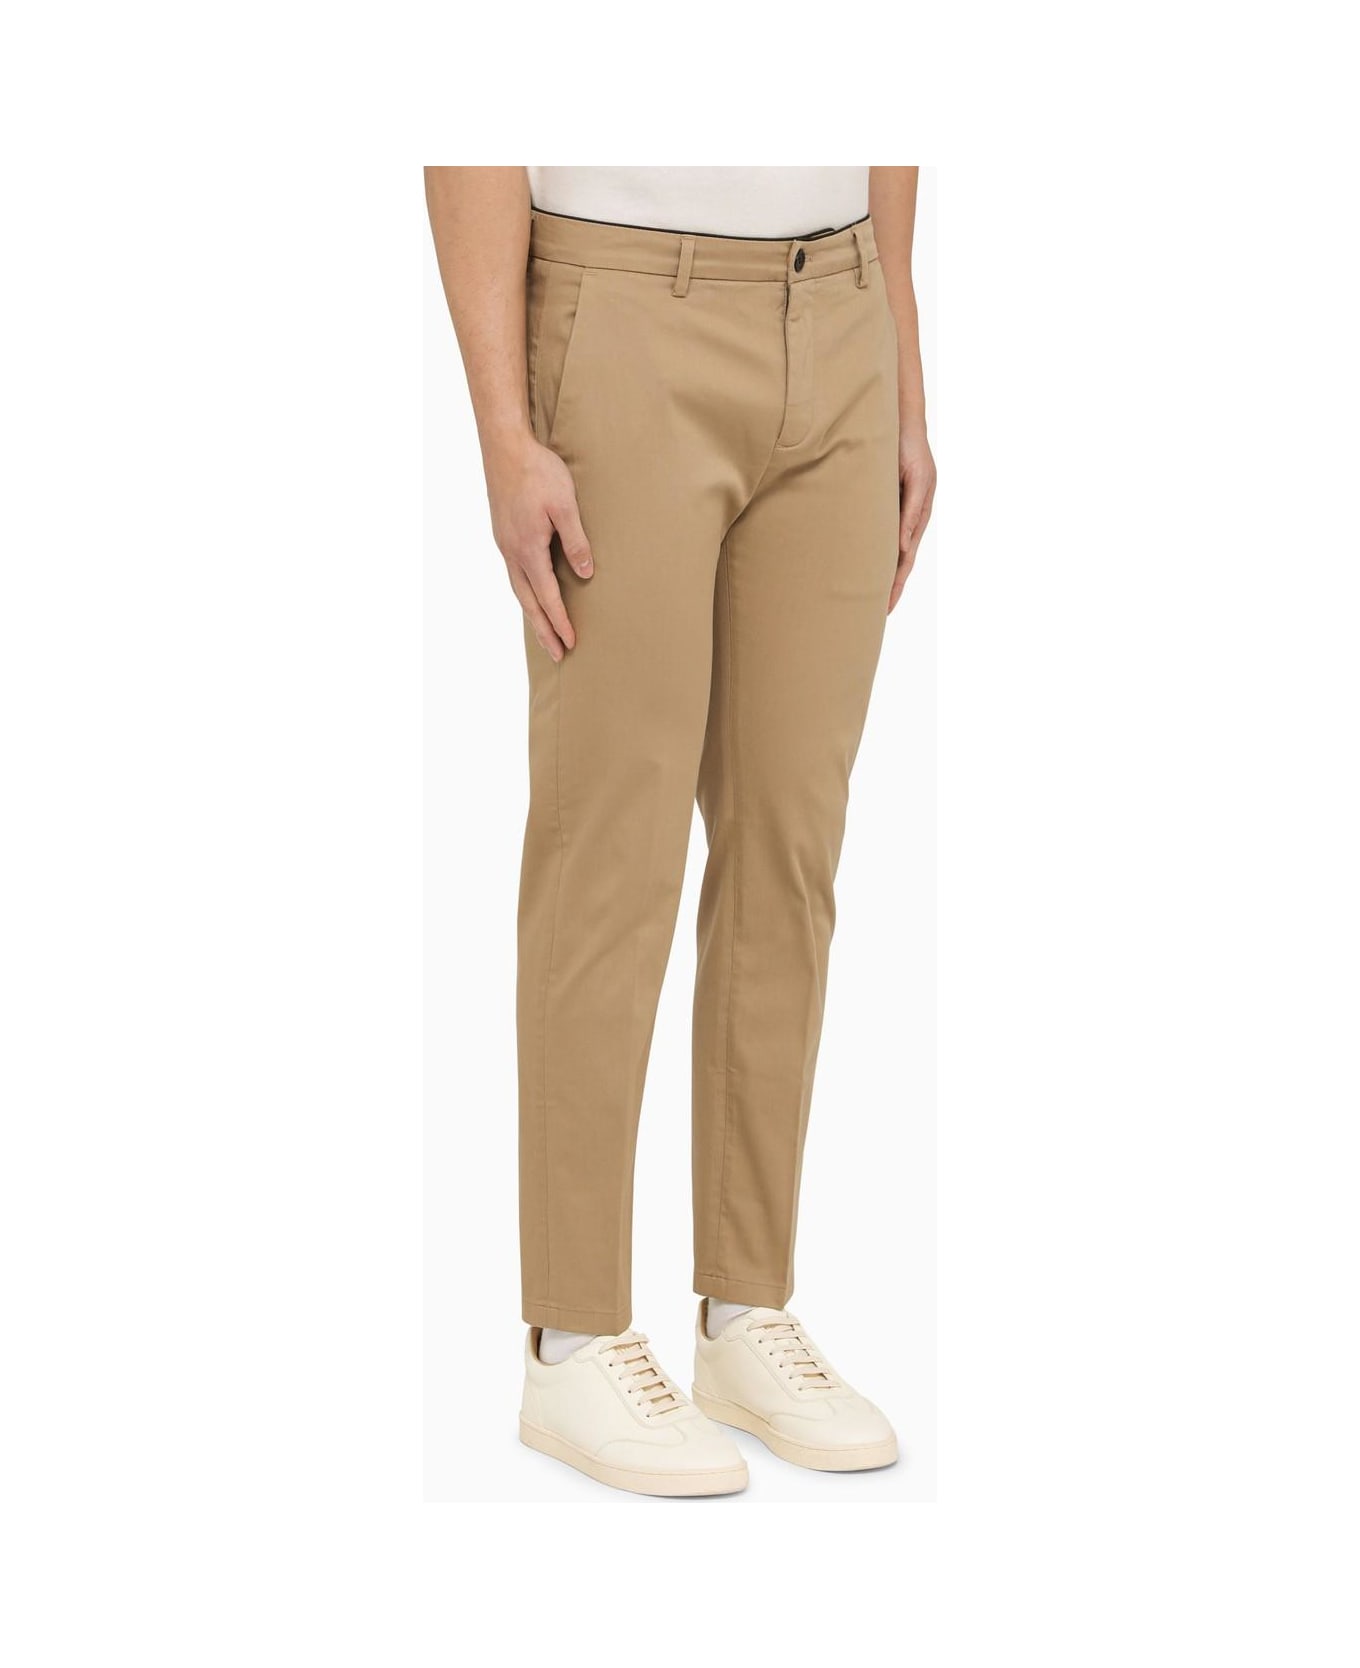 Department Five Regular Beige Cotton Trousers ボトムス